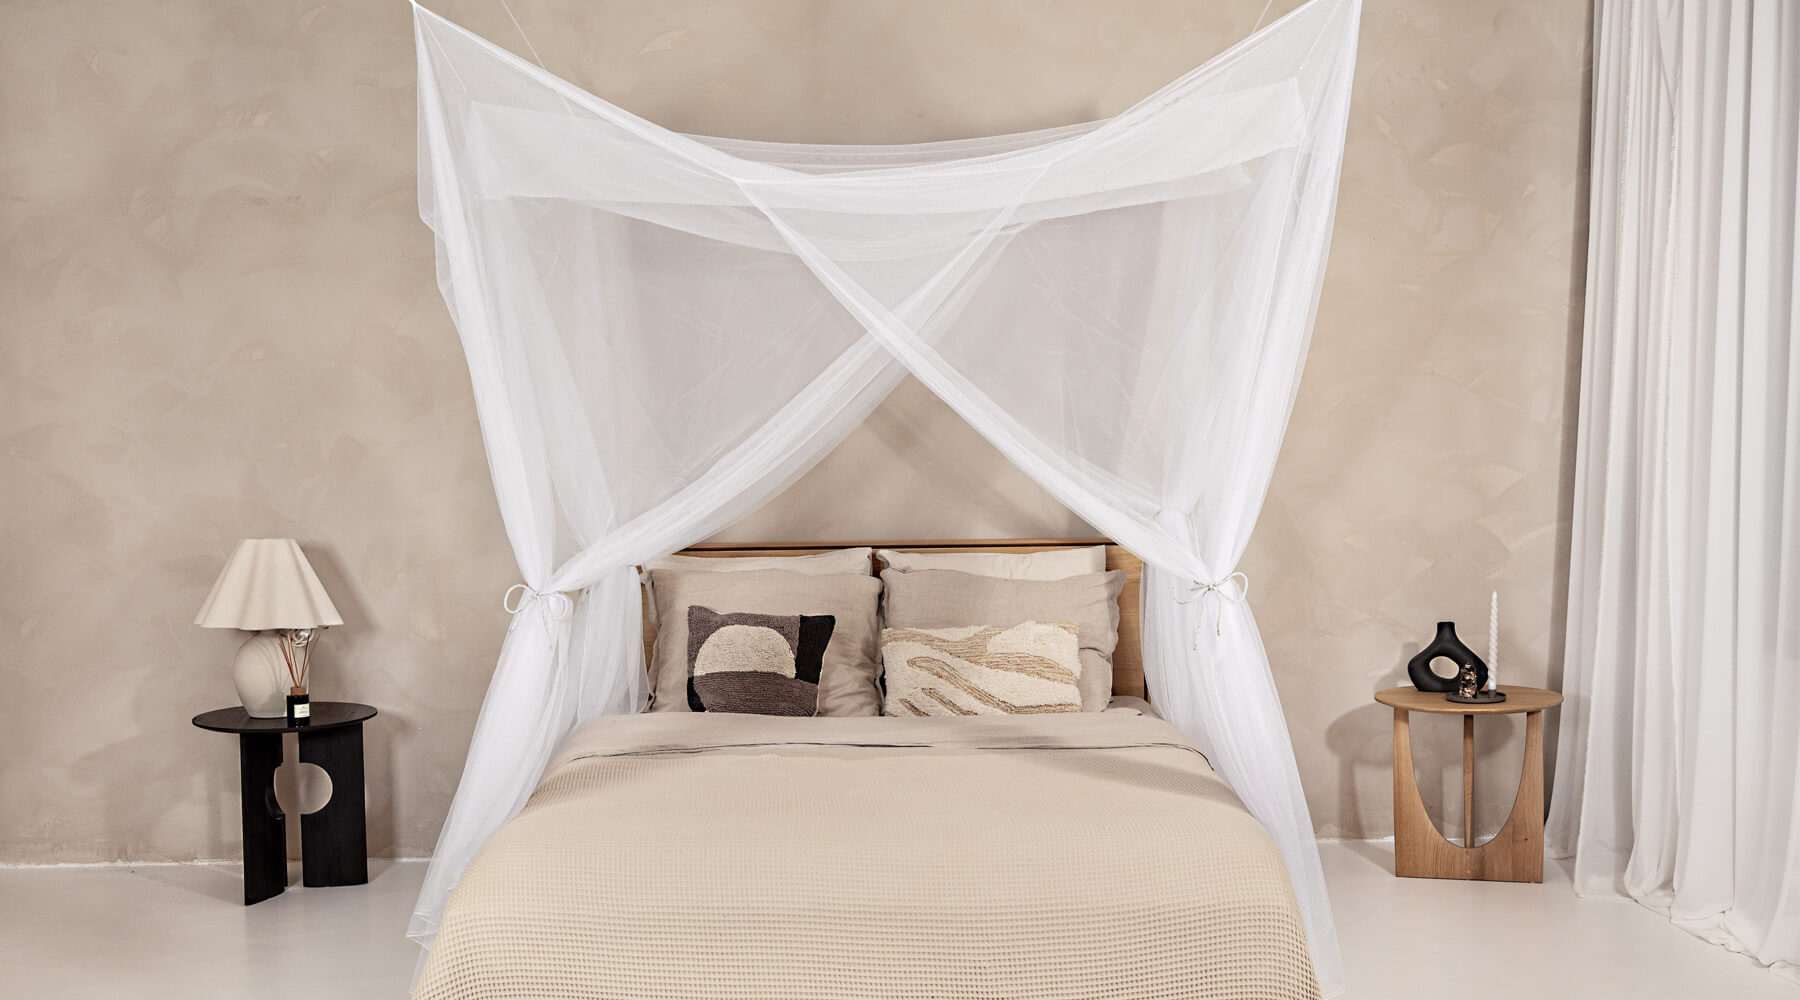 White mosquito net for bed canopy, rectangular netting in square design for luxury bedroom decoration